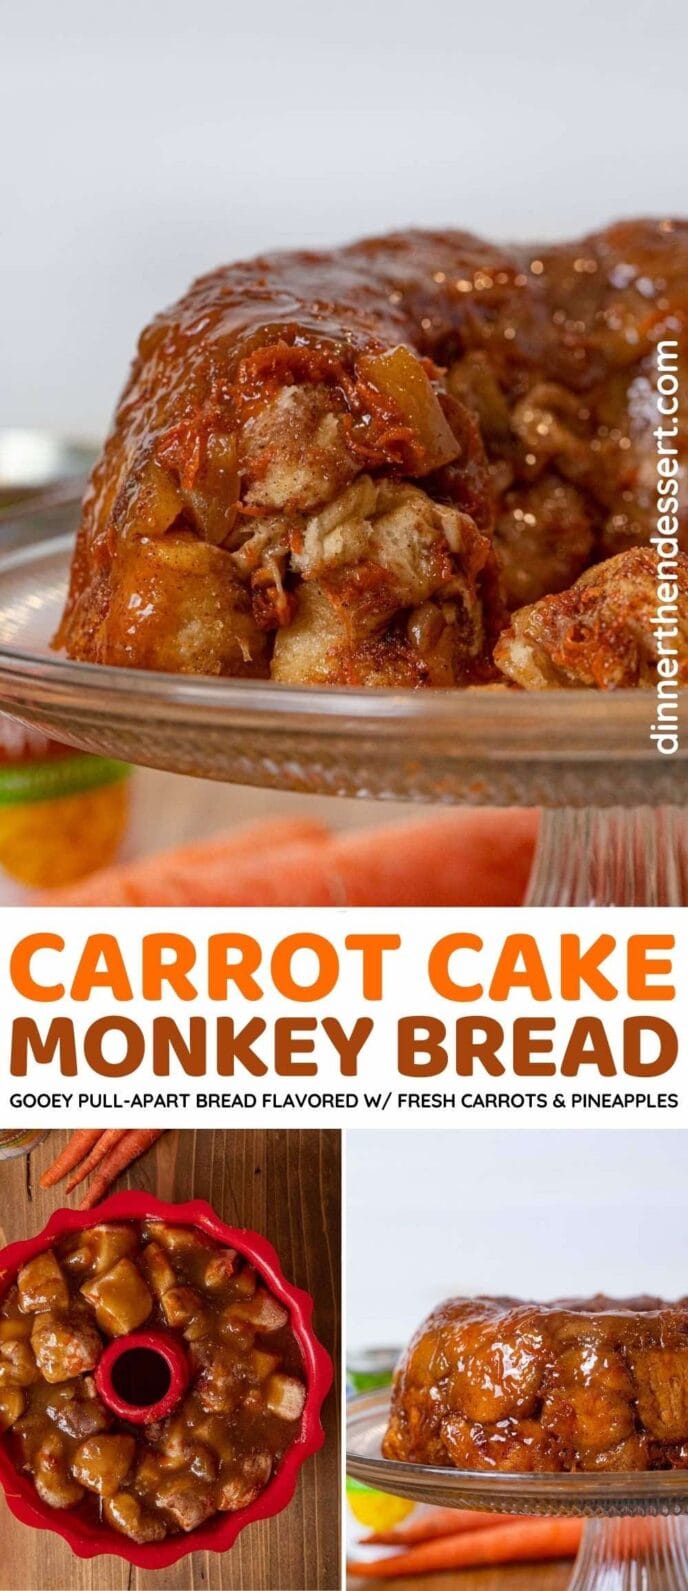 Carrot Cake Monkey Bread collage